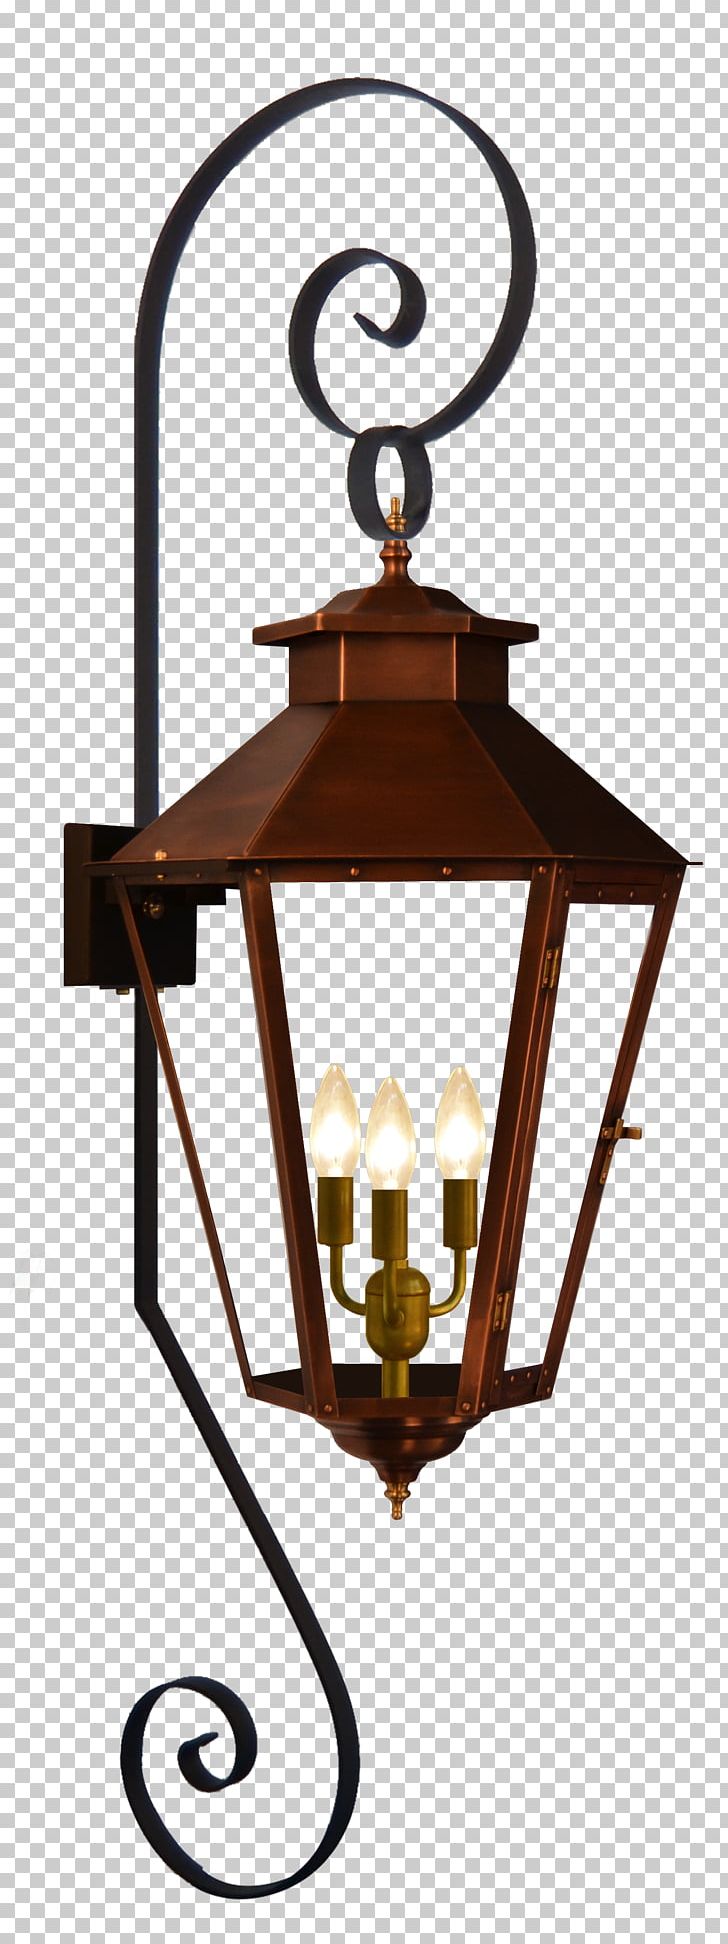 Light Fixture Gas Lighting Lantern PNG, Clipart, Candle, Ceiling Fixture, Copper, Coppersmith, Electric Light Free PNG Download